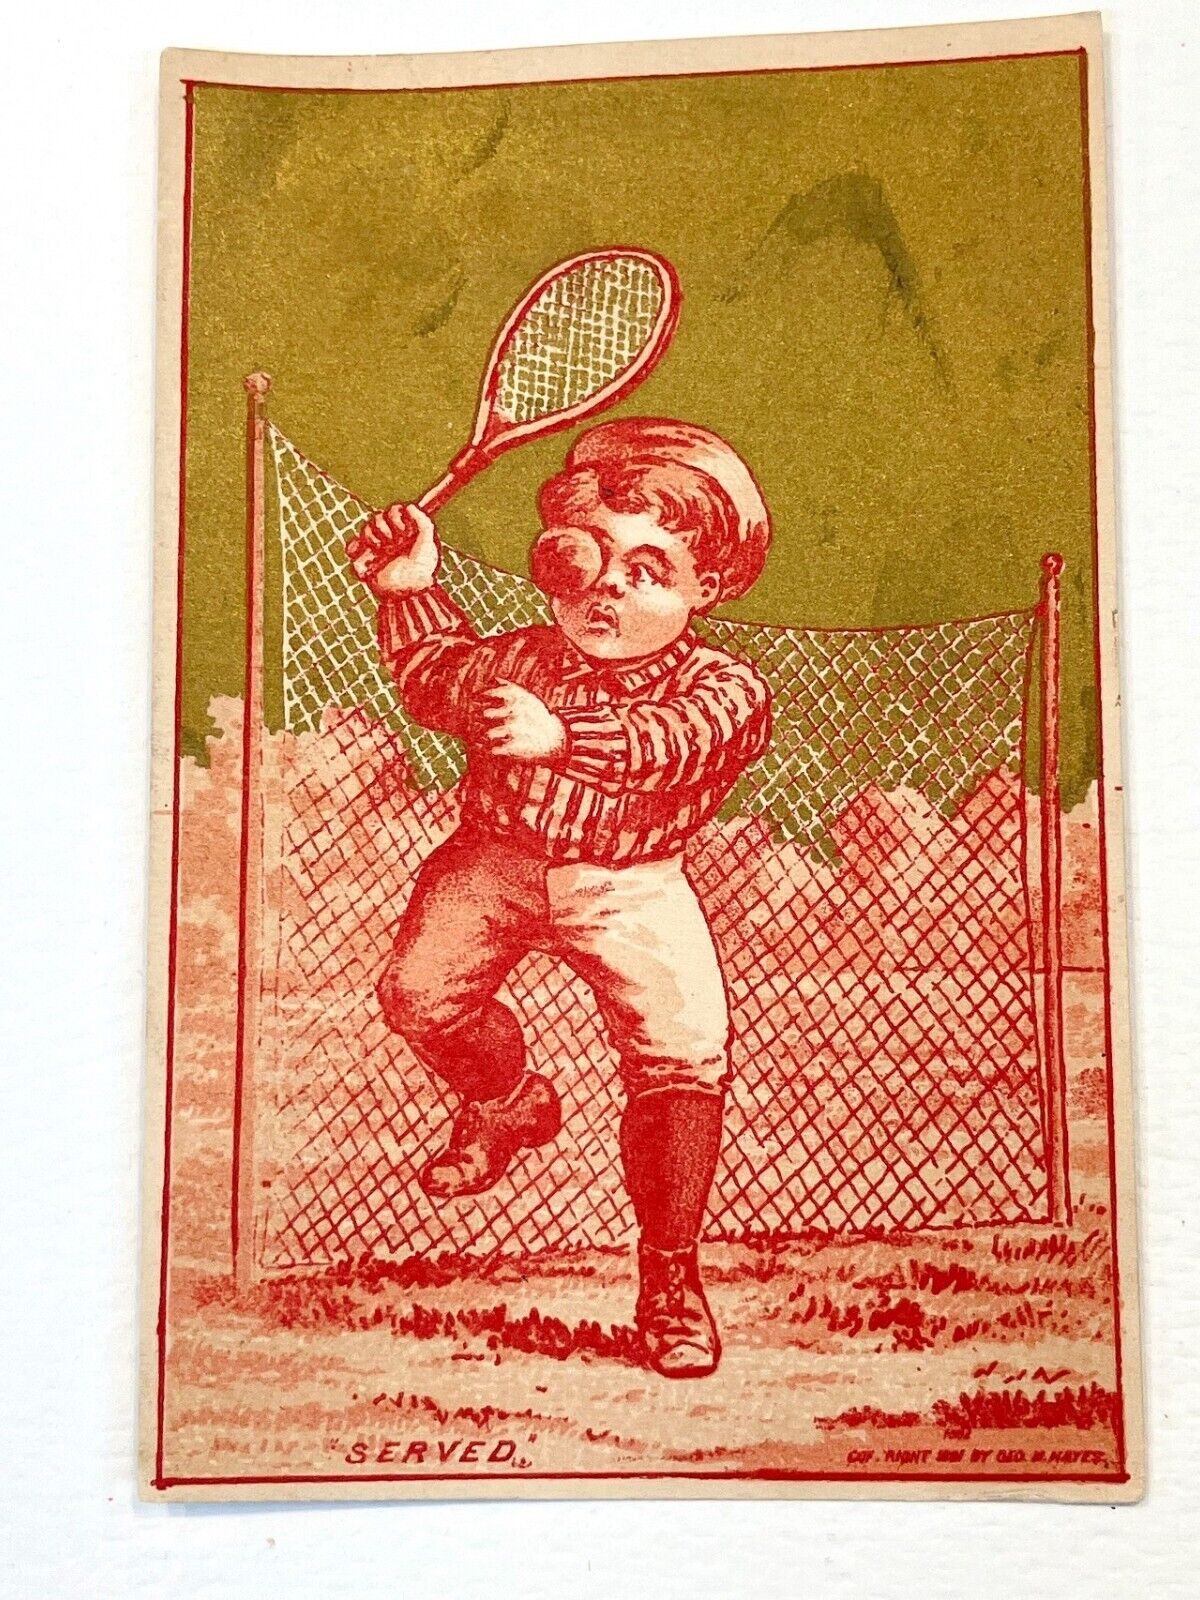 VICTORIAN TRADE CARD GEO. M HAYES 1881 “Served” Tennis Sports